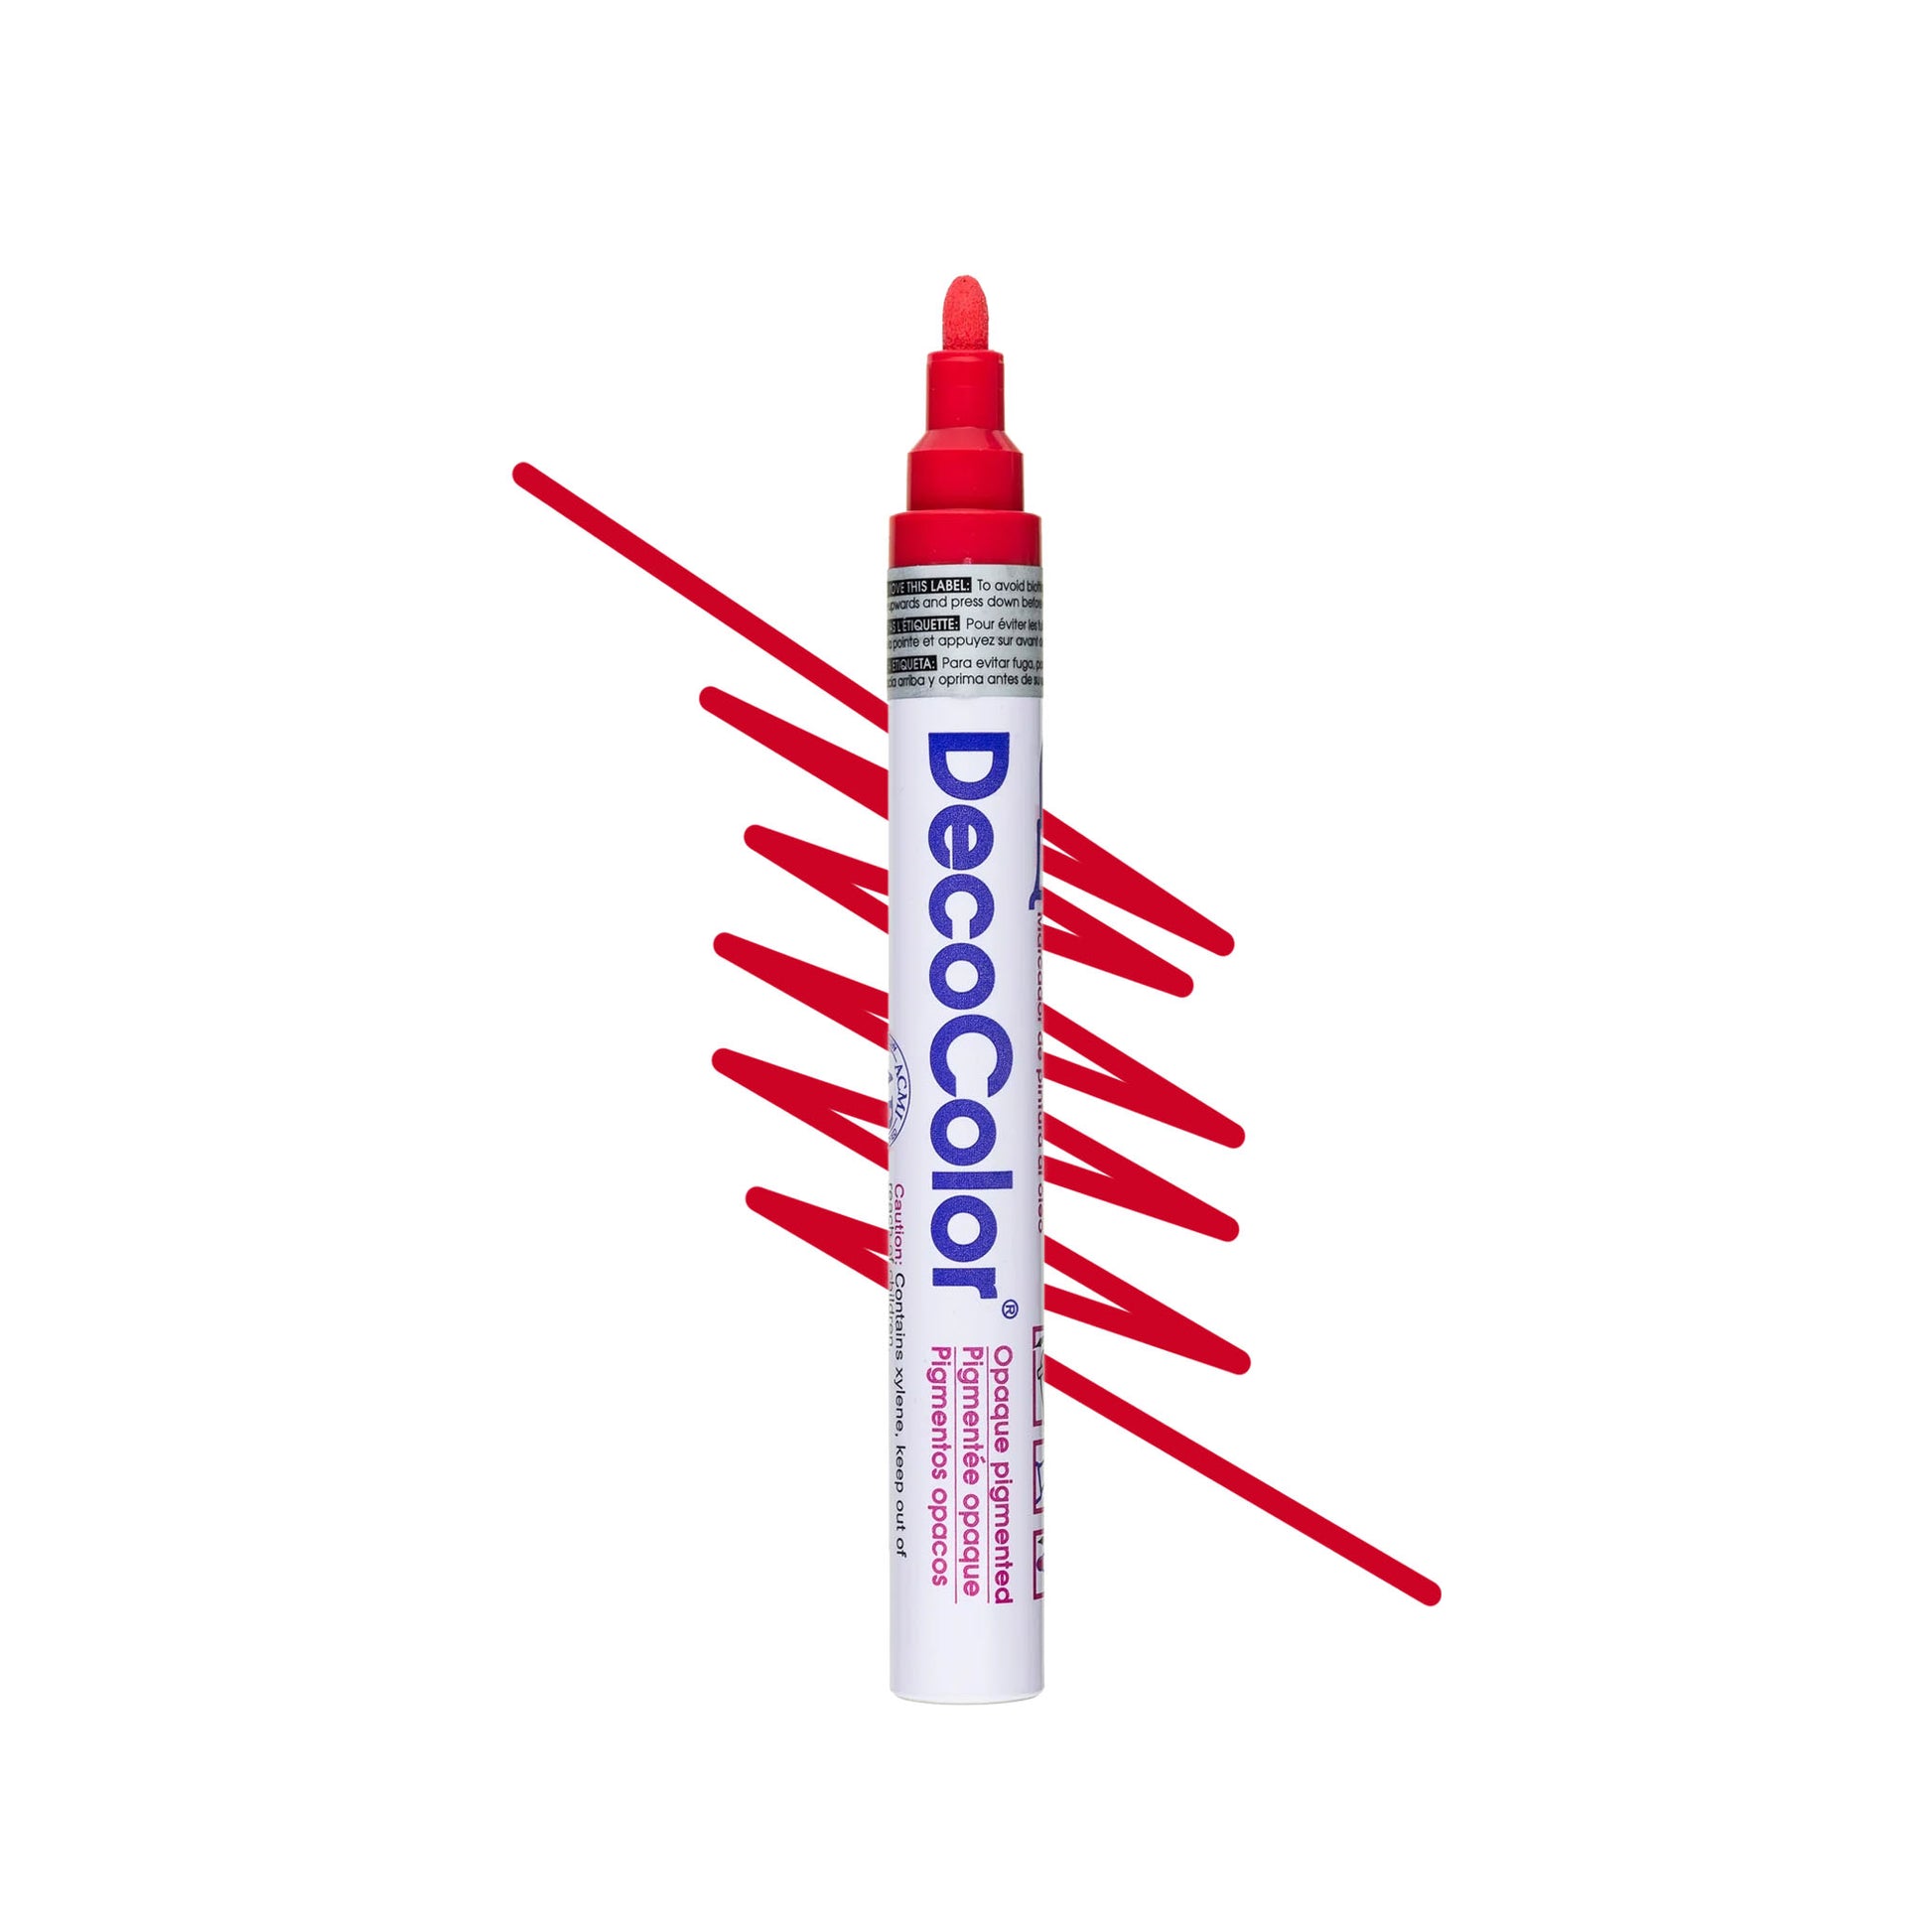 Deco Color artist paint markers in bright red.